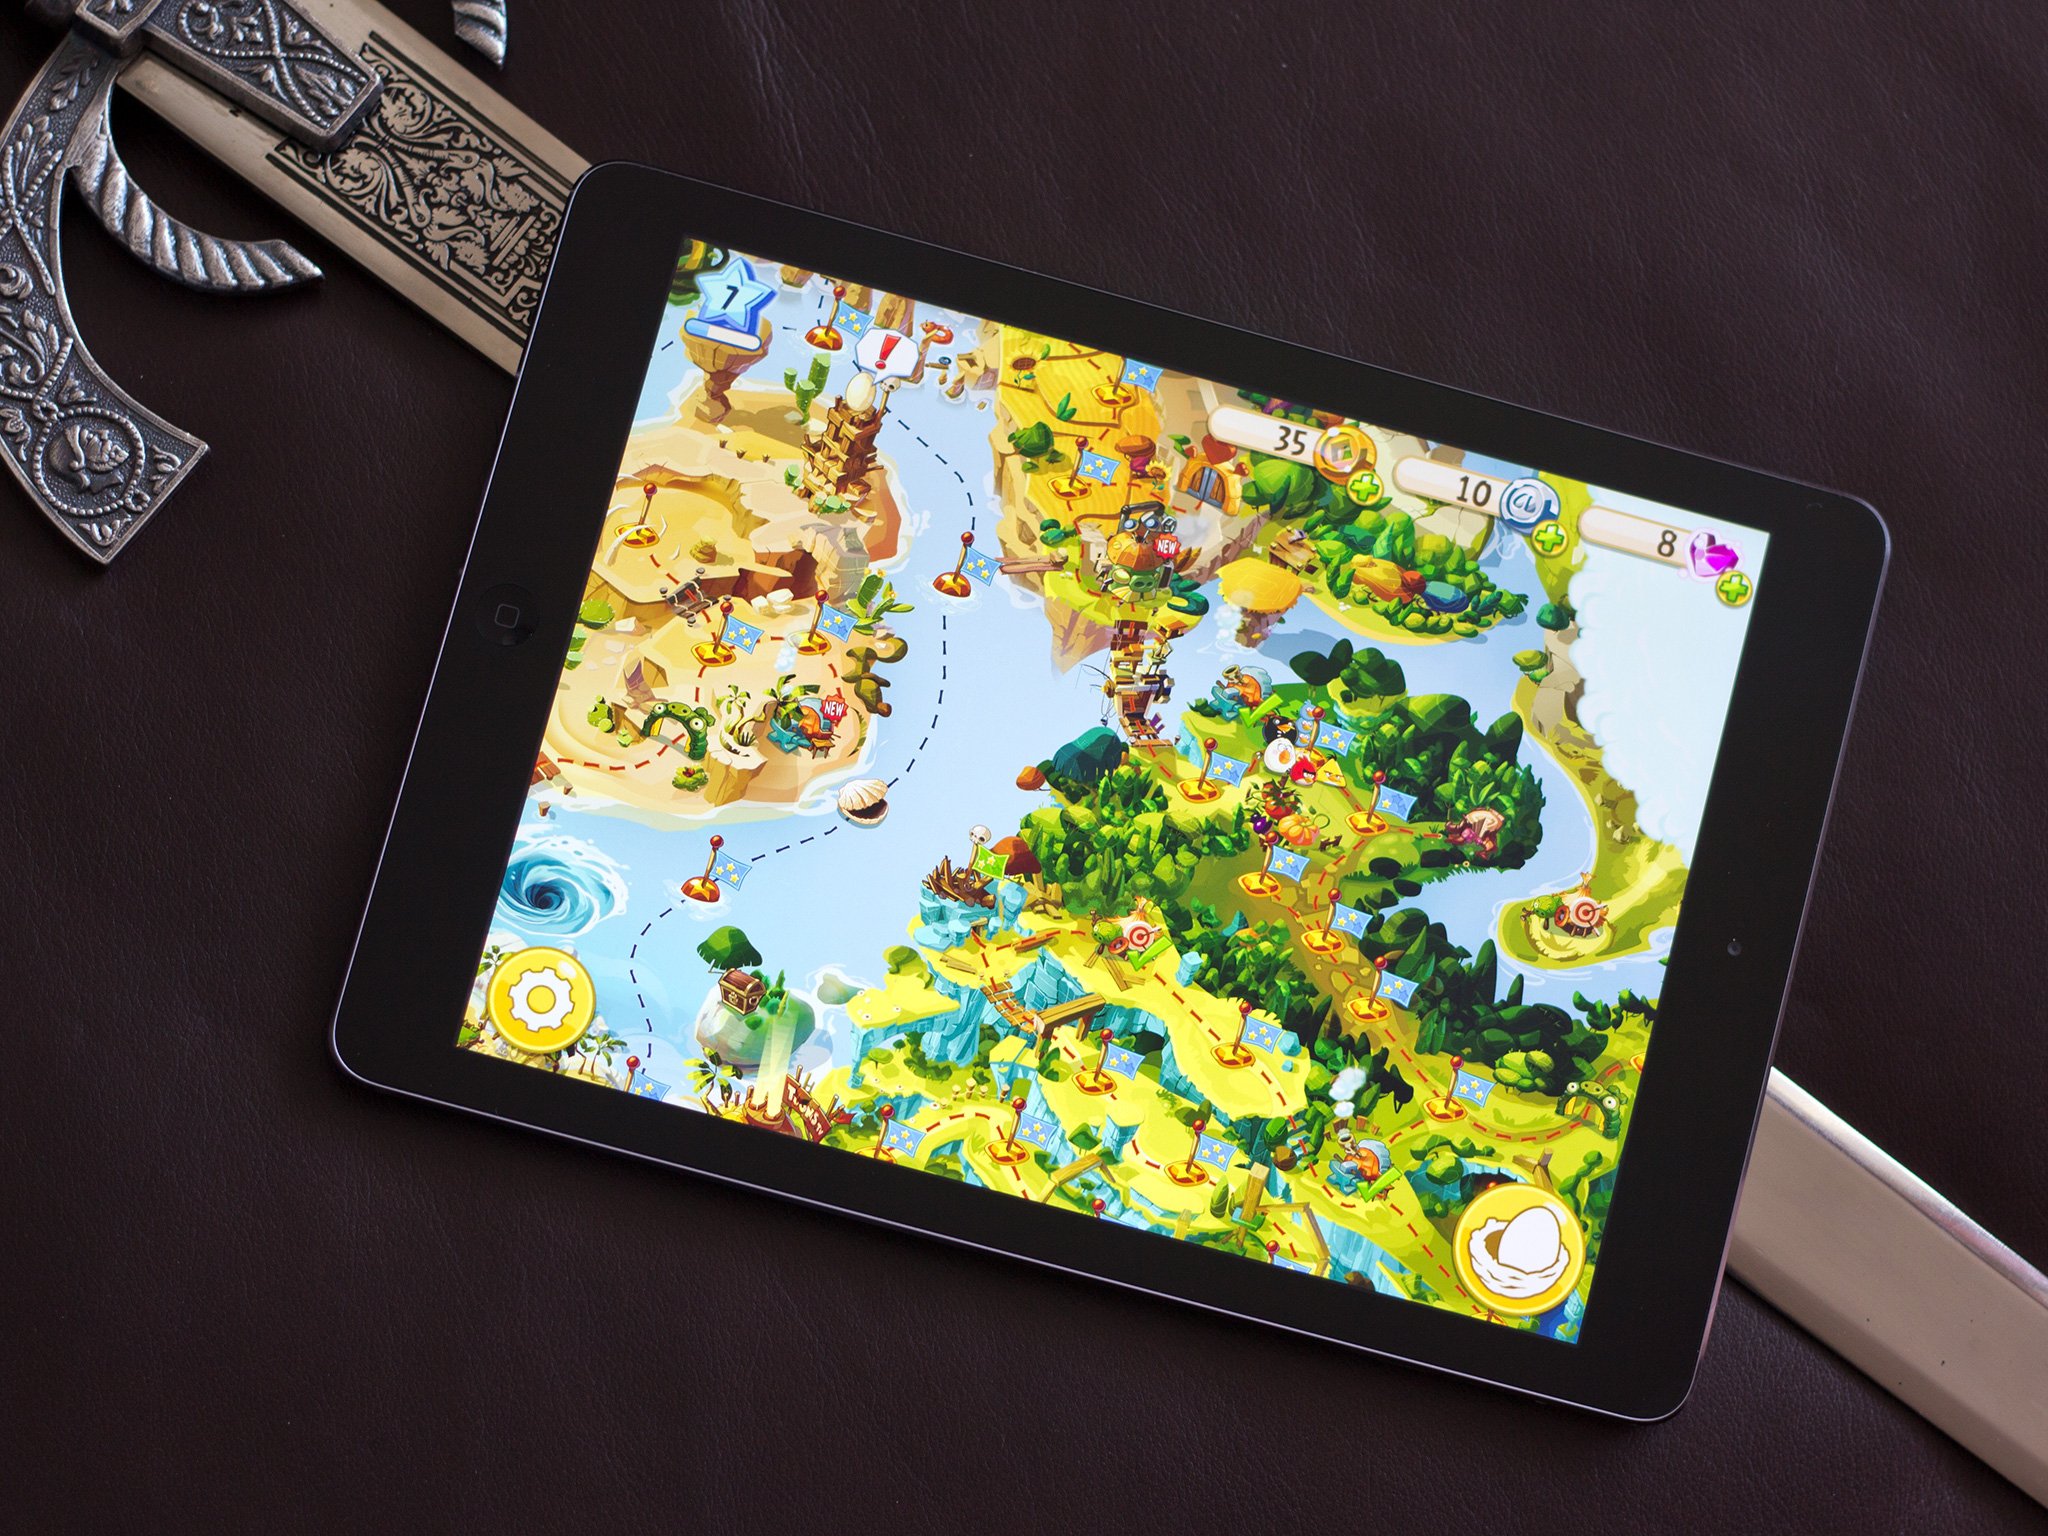 Download Angry Birds Epic RPG app for iPhone and iPad